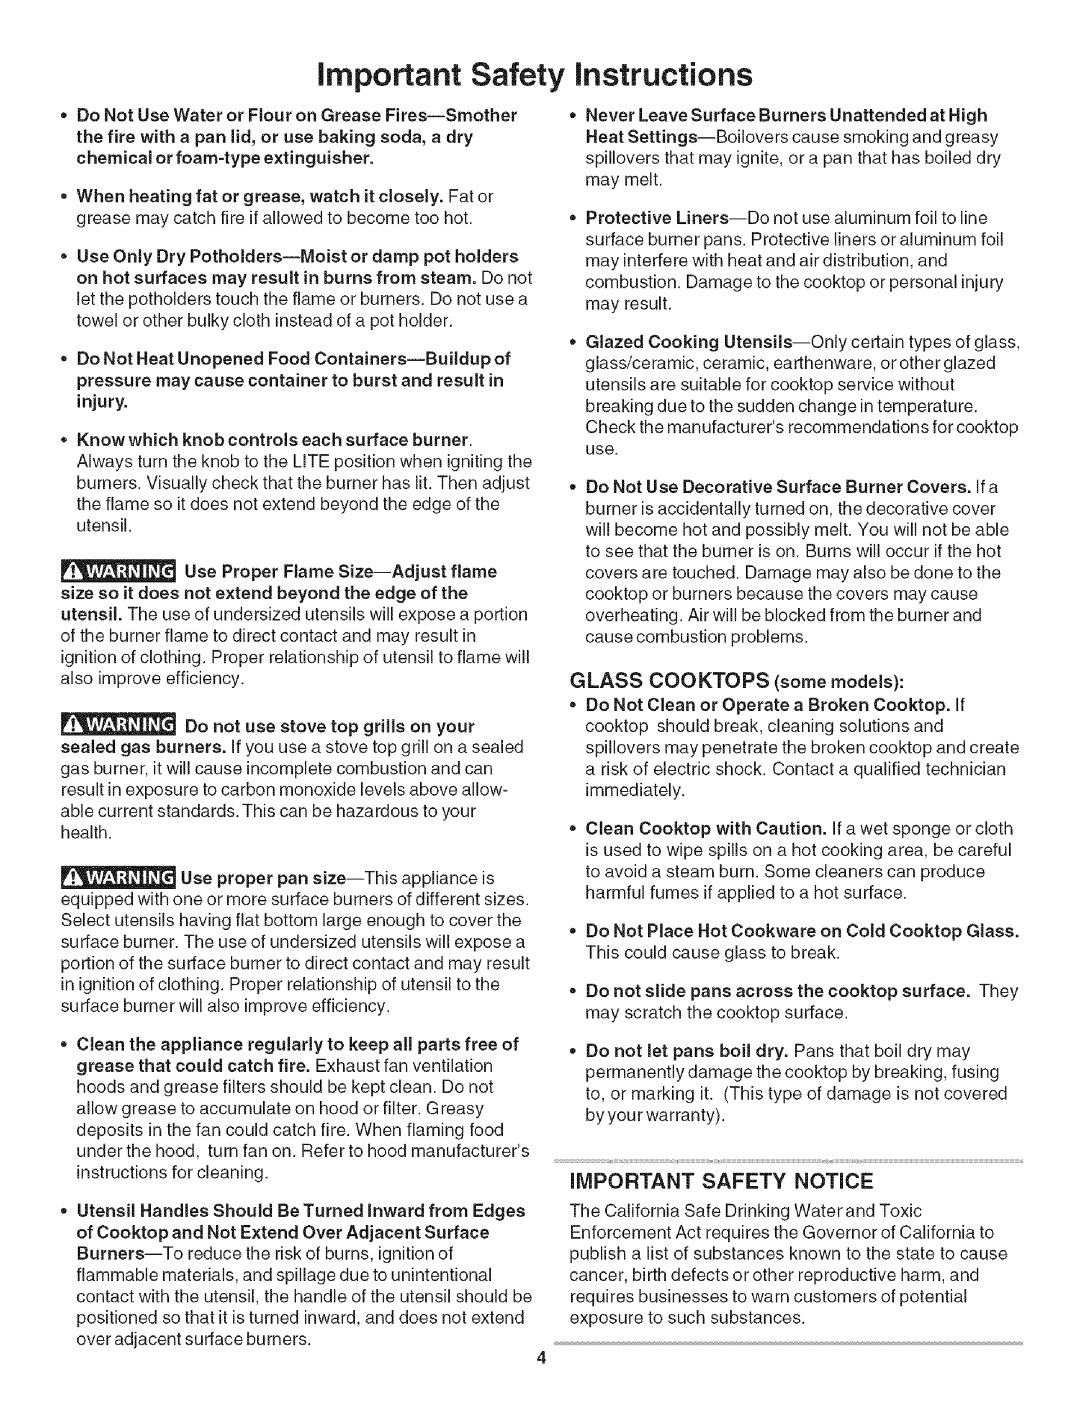 Kenmore 790.3101 manual important Safety instructions, iMPORTANT SAFETY NOTICE 